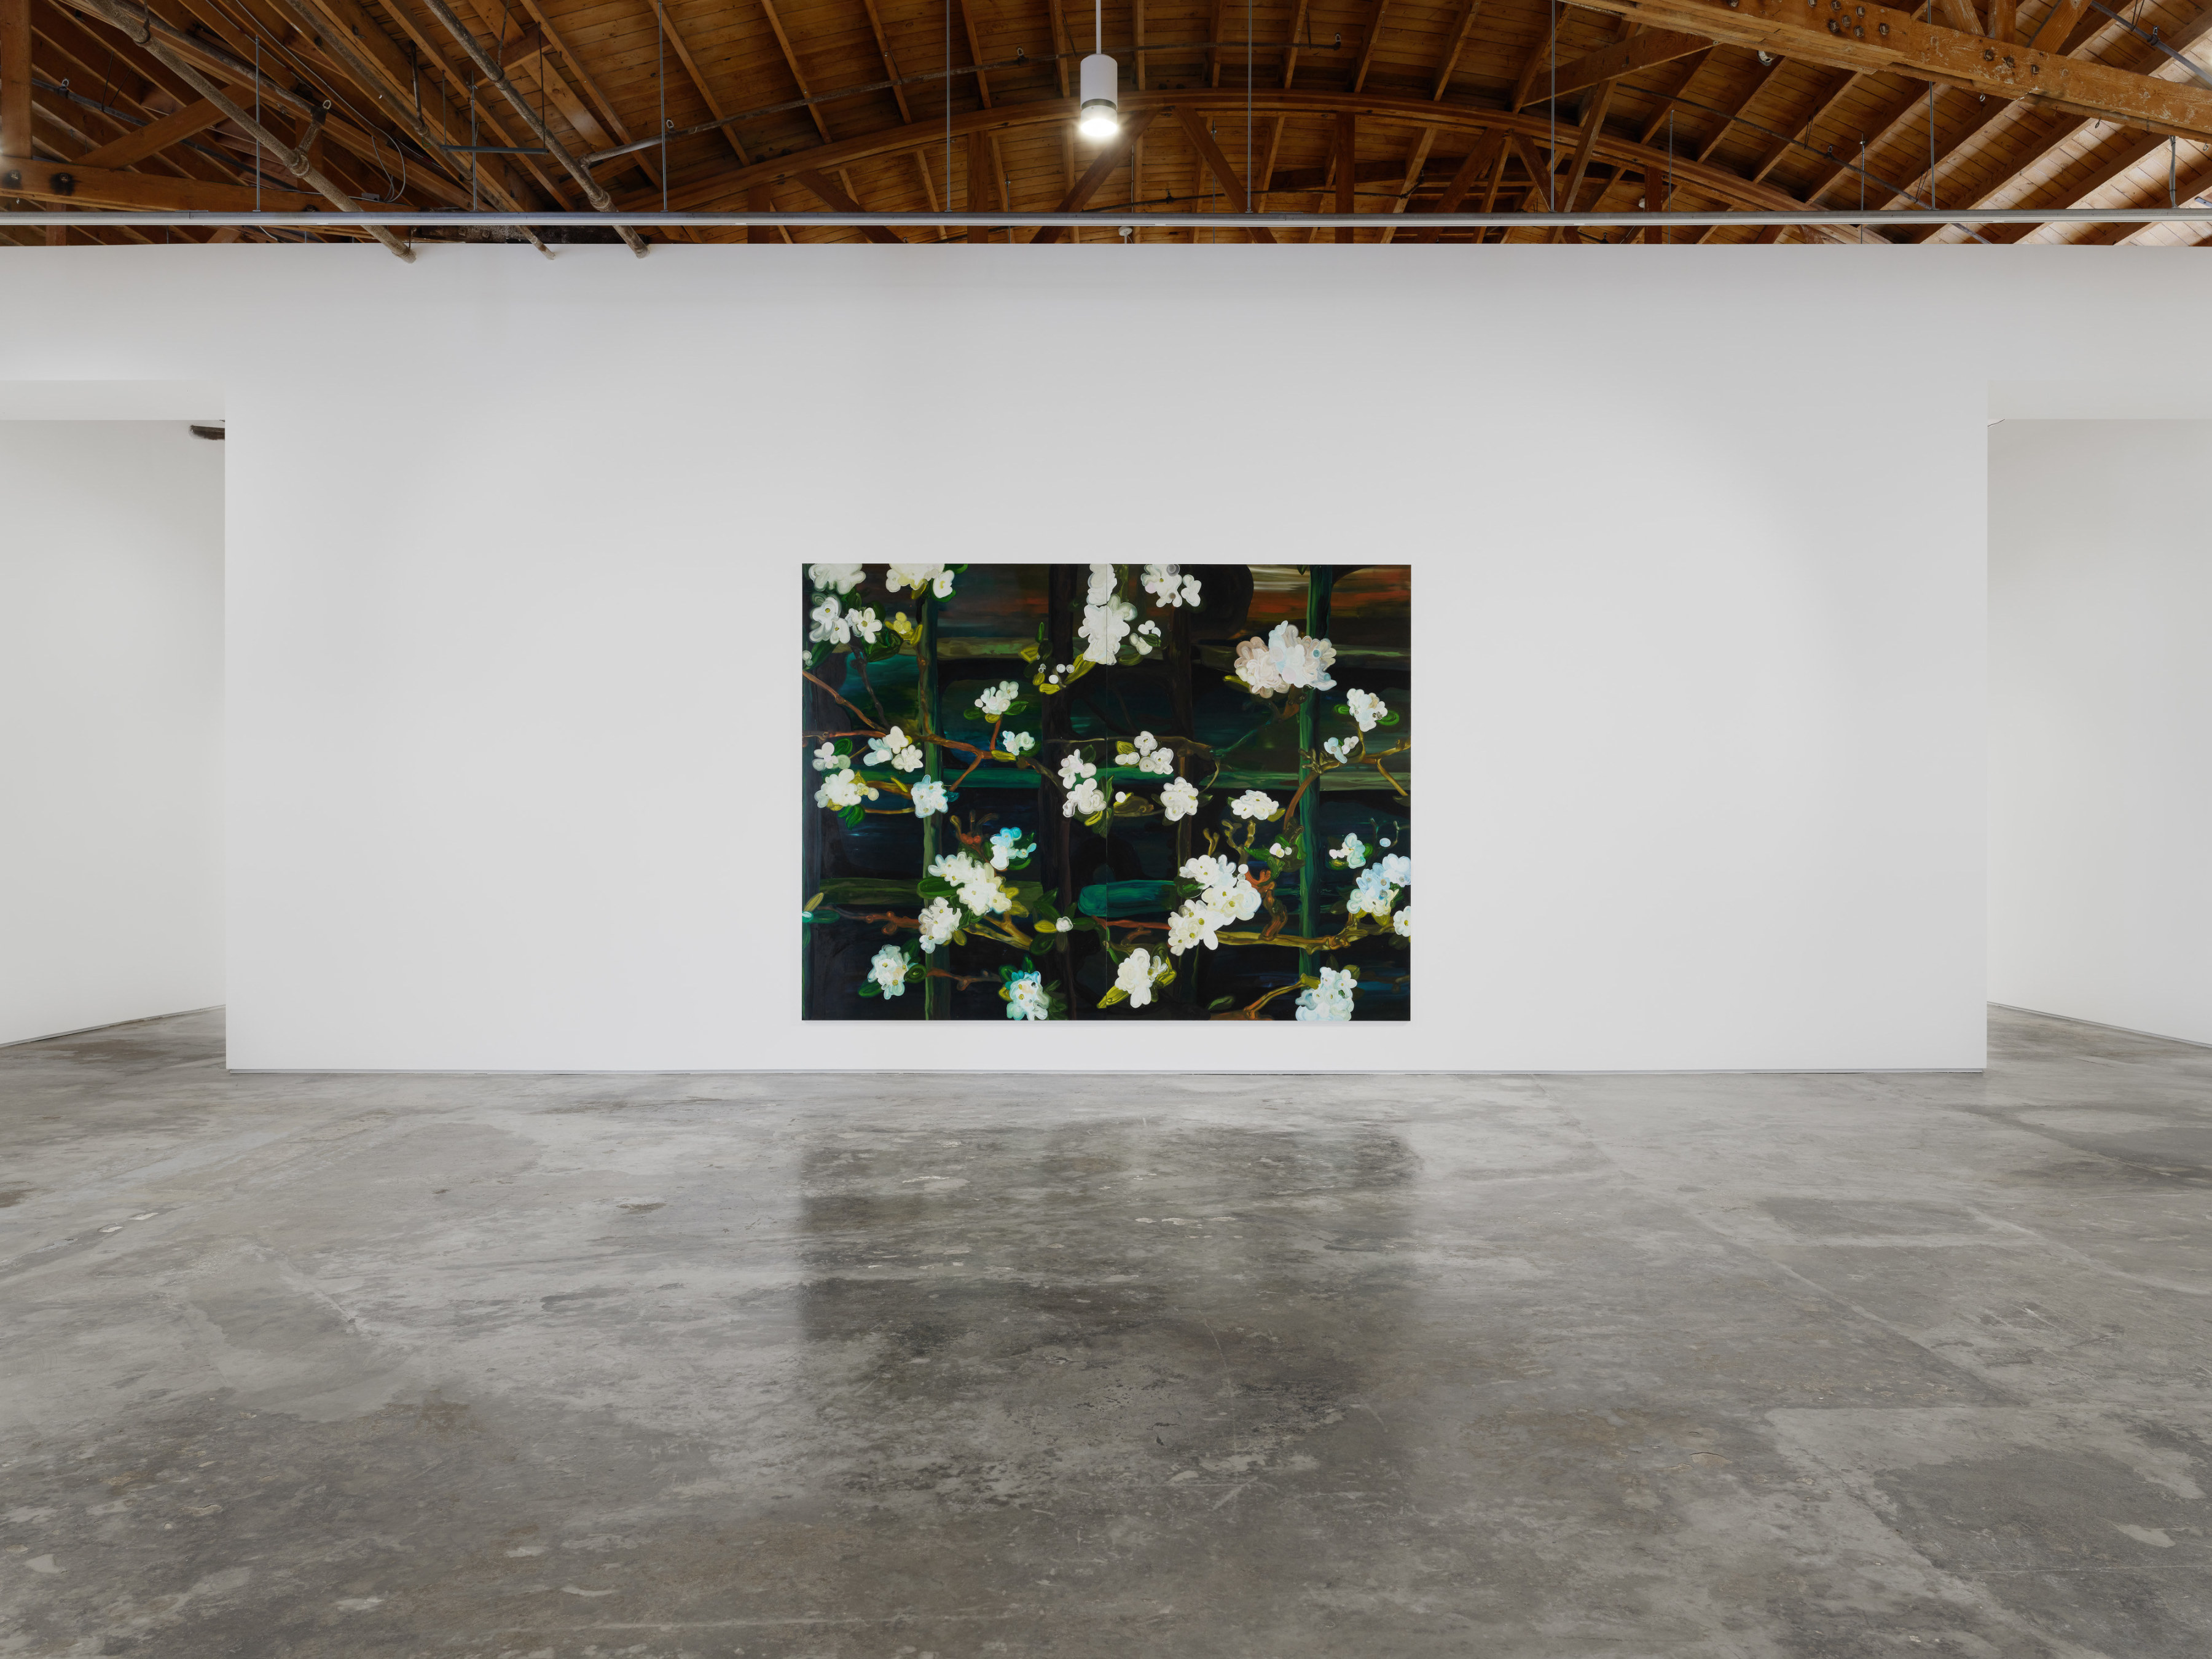 Installation view of Clare Woods’ “I Blame Nature” at Night Gallery 